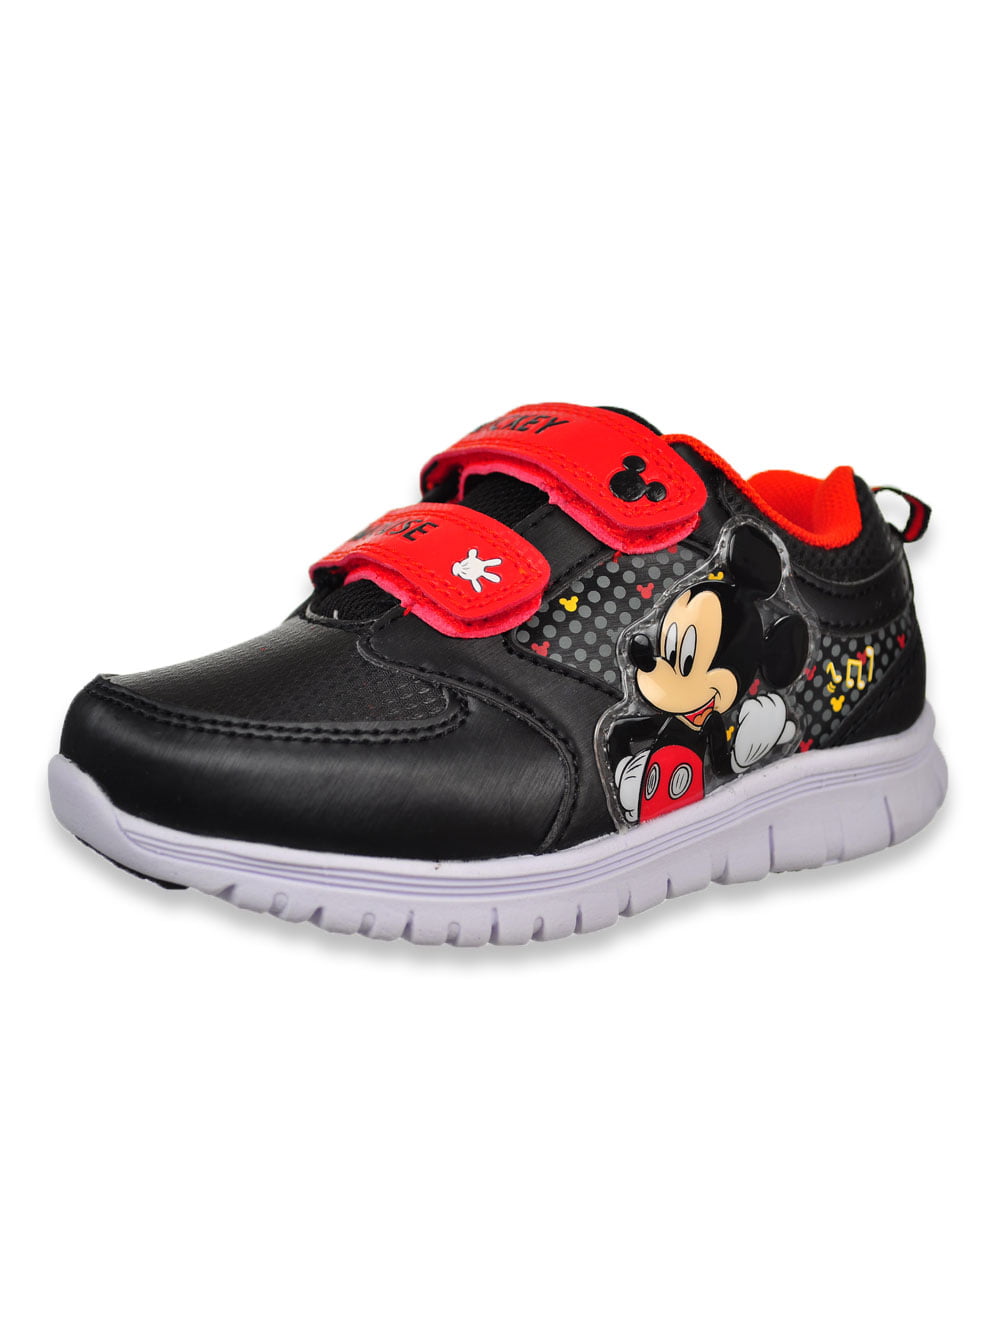 Disney Mickey Mouse Light-Up Sneakers 